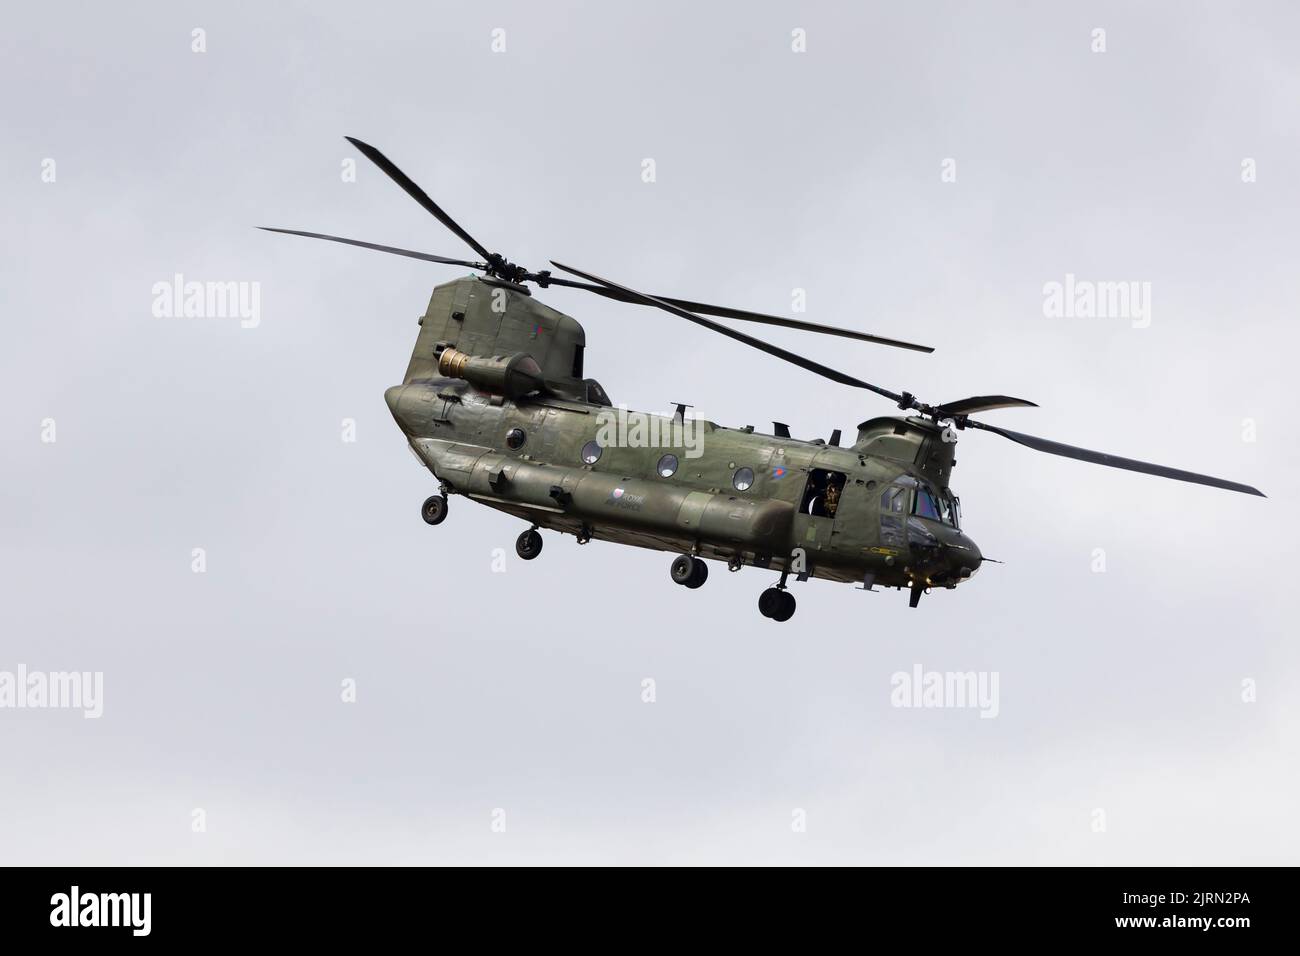 Boeing CH-47D Chinook heavy lift of the Royal Air Force Chinook Display Team, based at RAF Odiham, RAF Syerston families day. Stock Photo